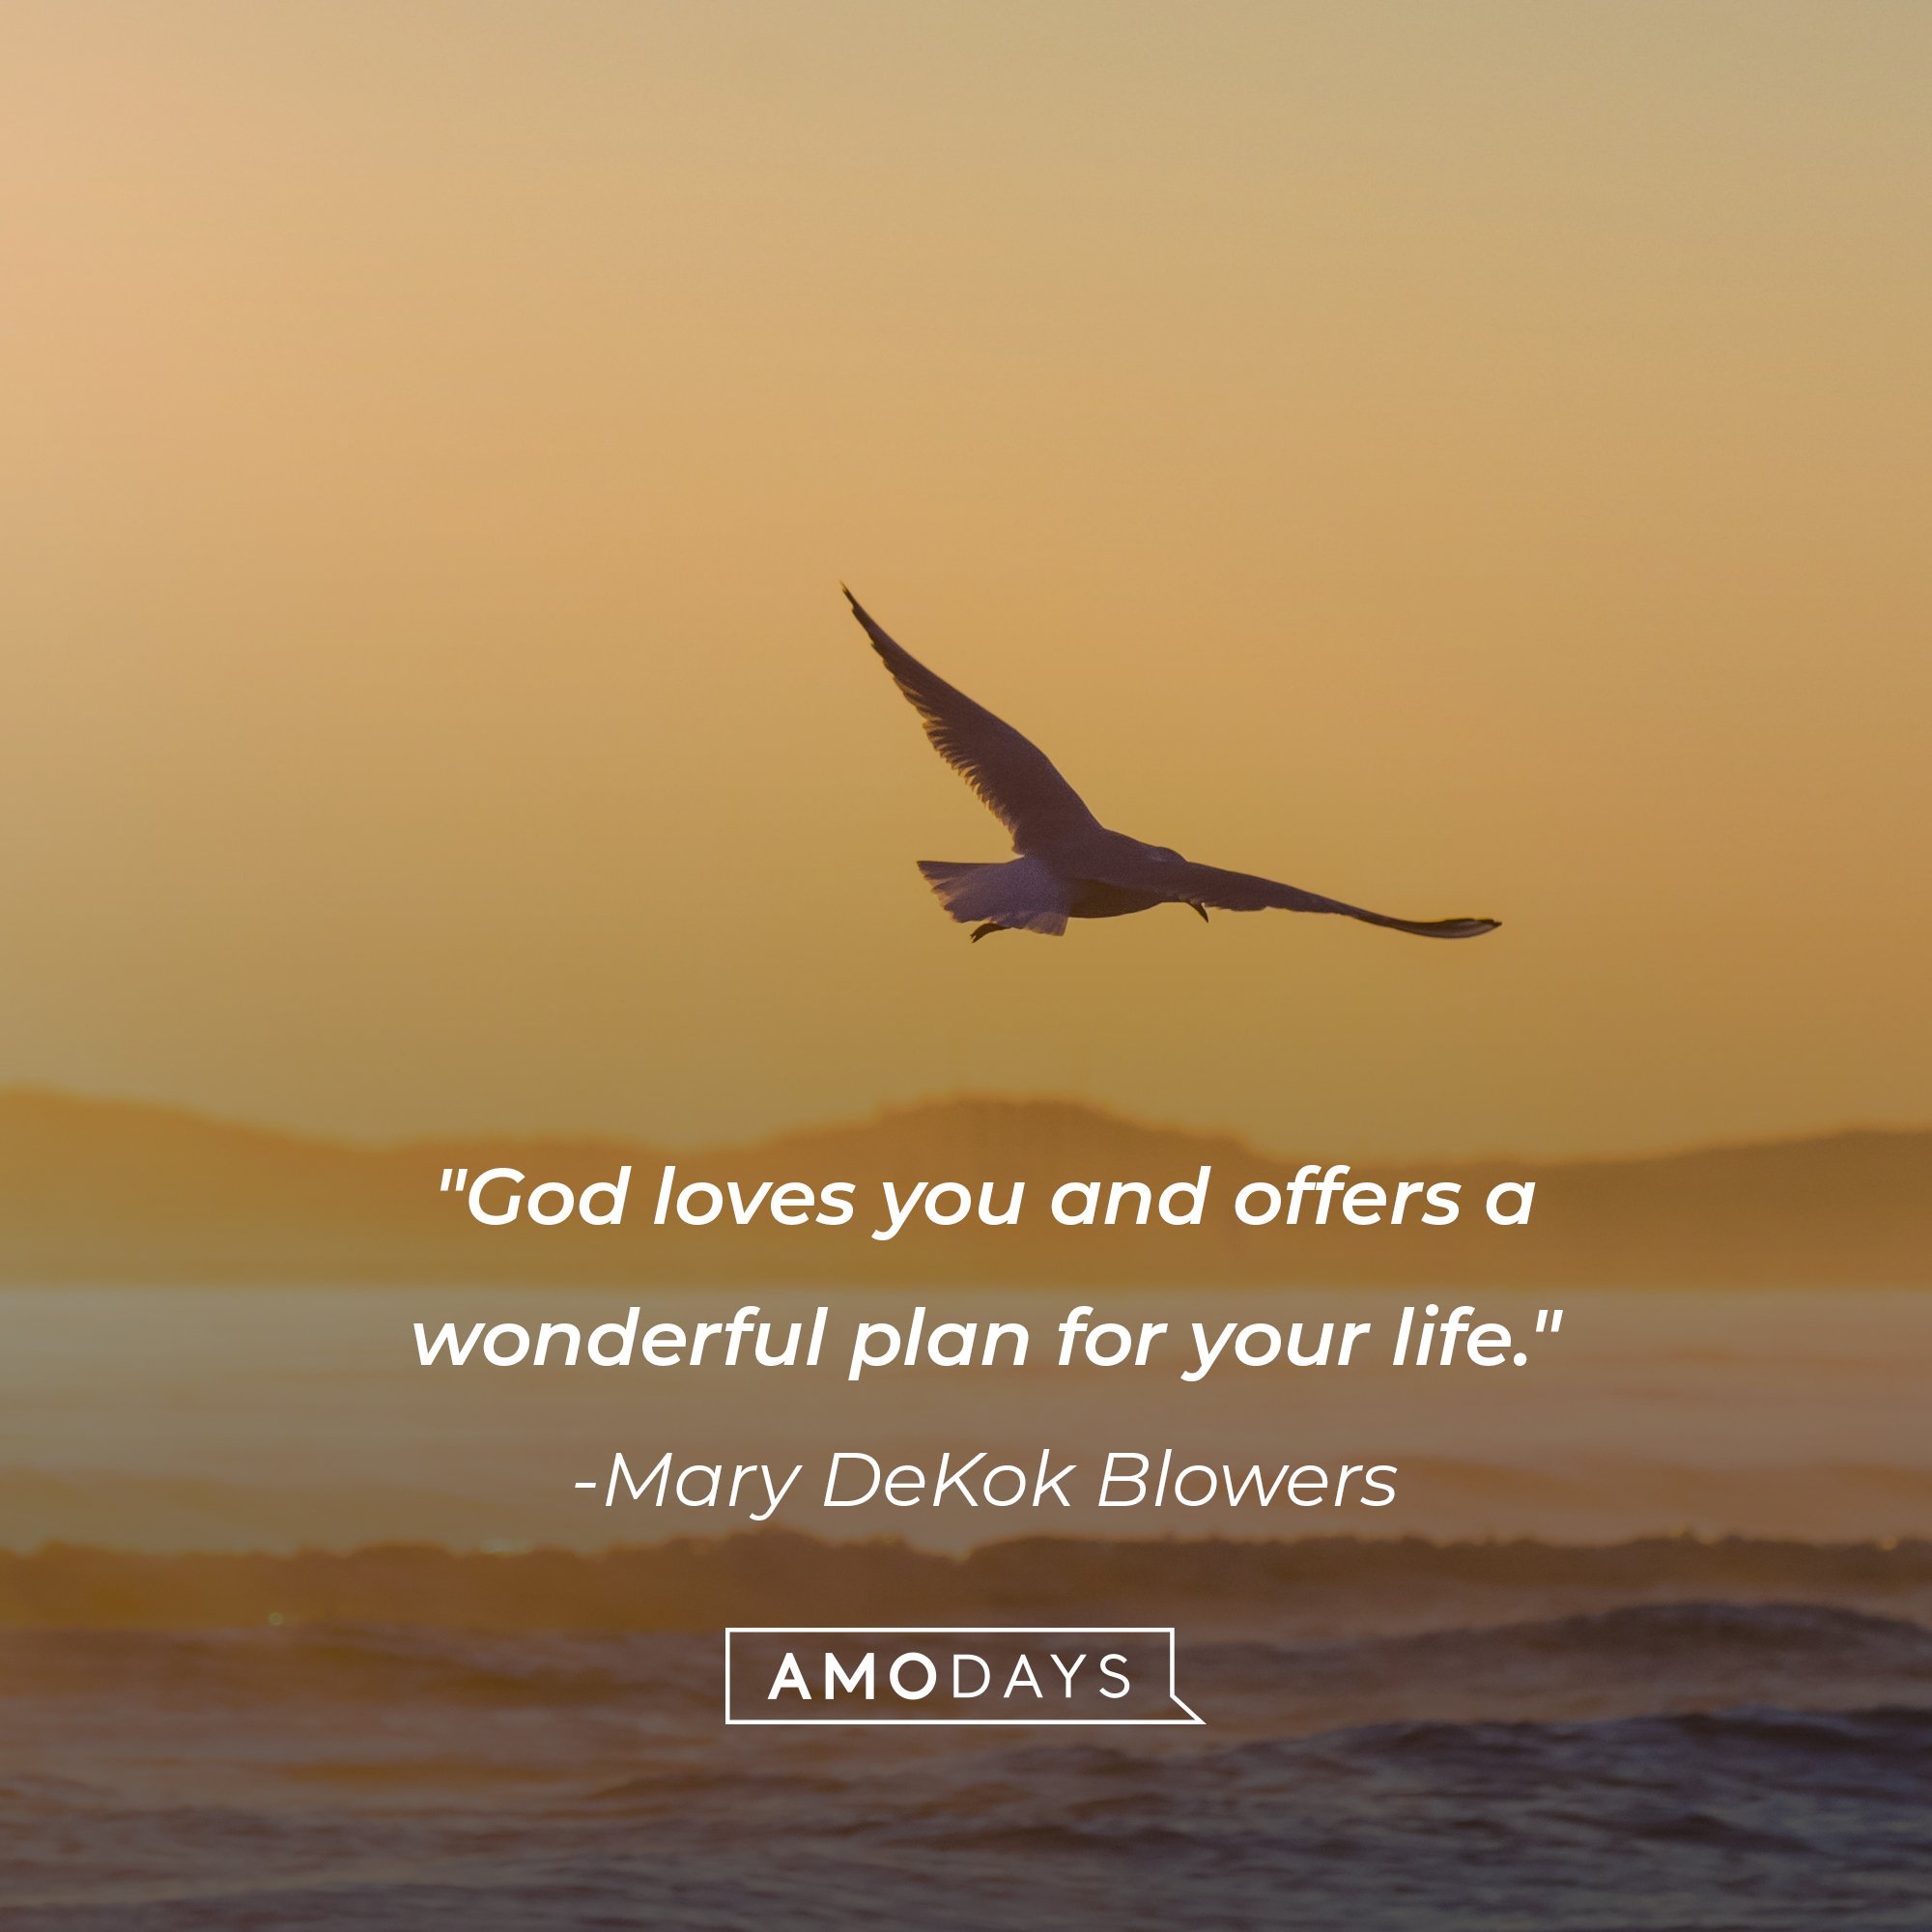 Mary DeKok Blowers’ quote: "God loves you and offers a wonderful plan for your life." | Image: AmoDays